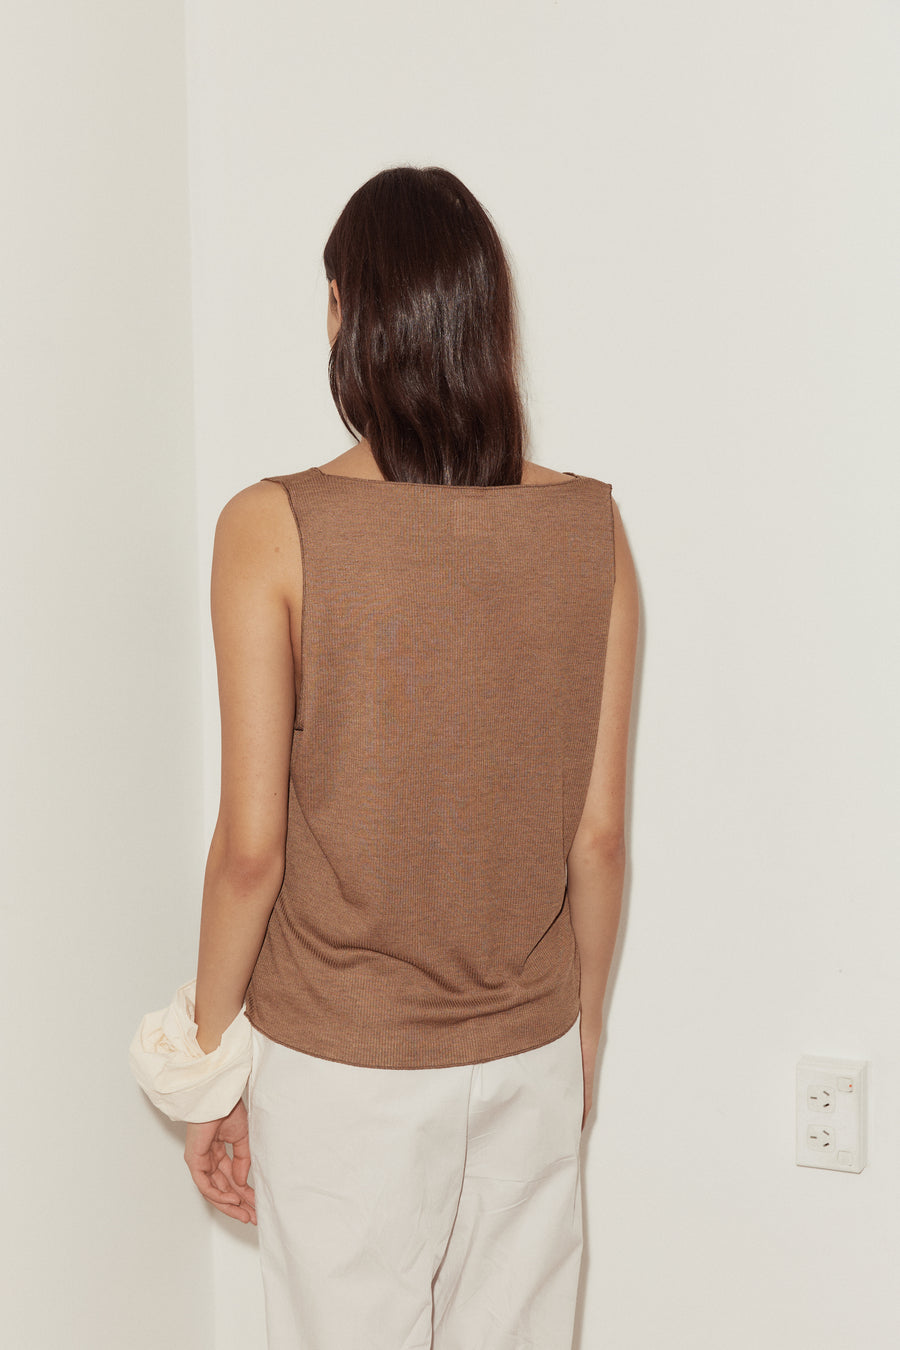 back shot of female model wearing the button up knit tank in coffee, features a minimal back with wide neckline. Styled with off white scrunchie worn on wrist and white ease trousers.